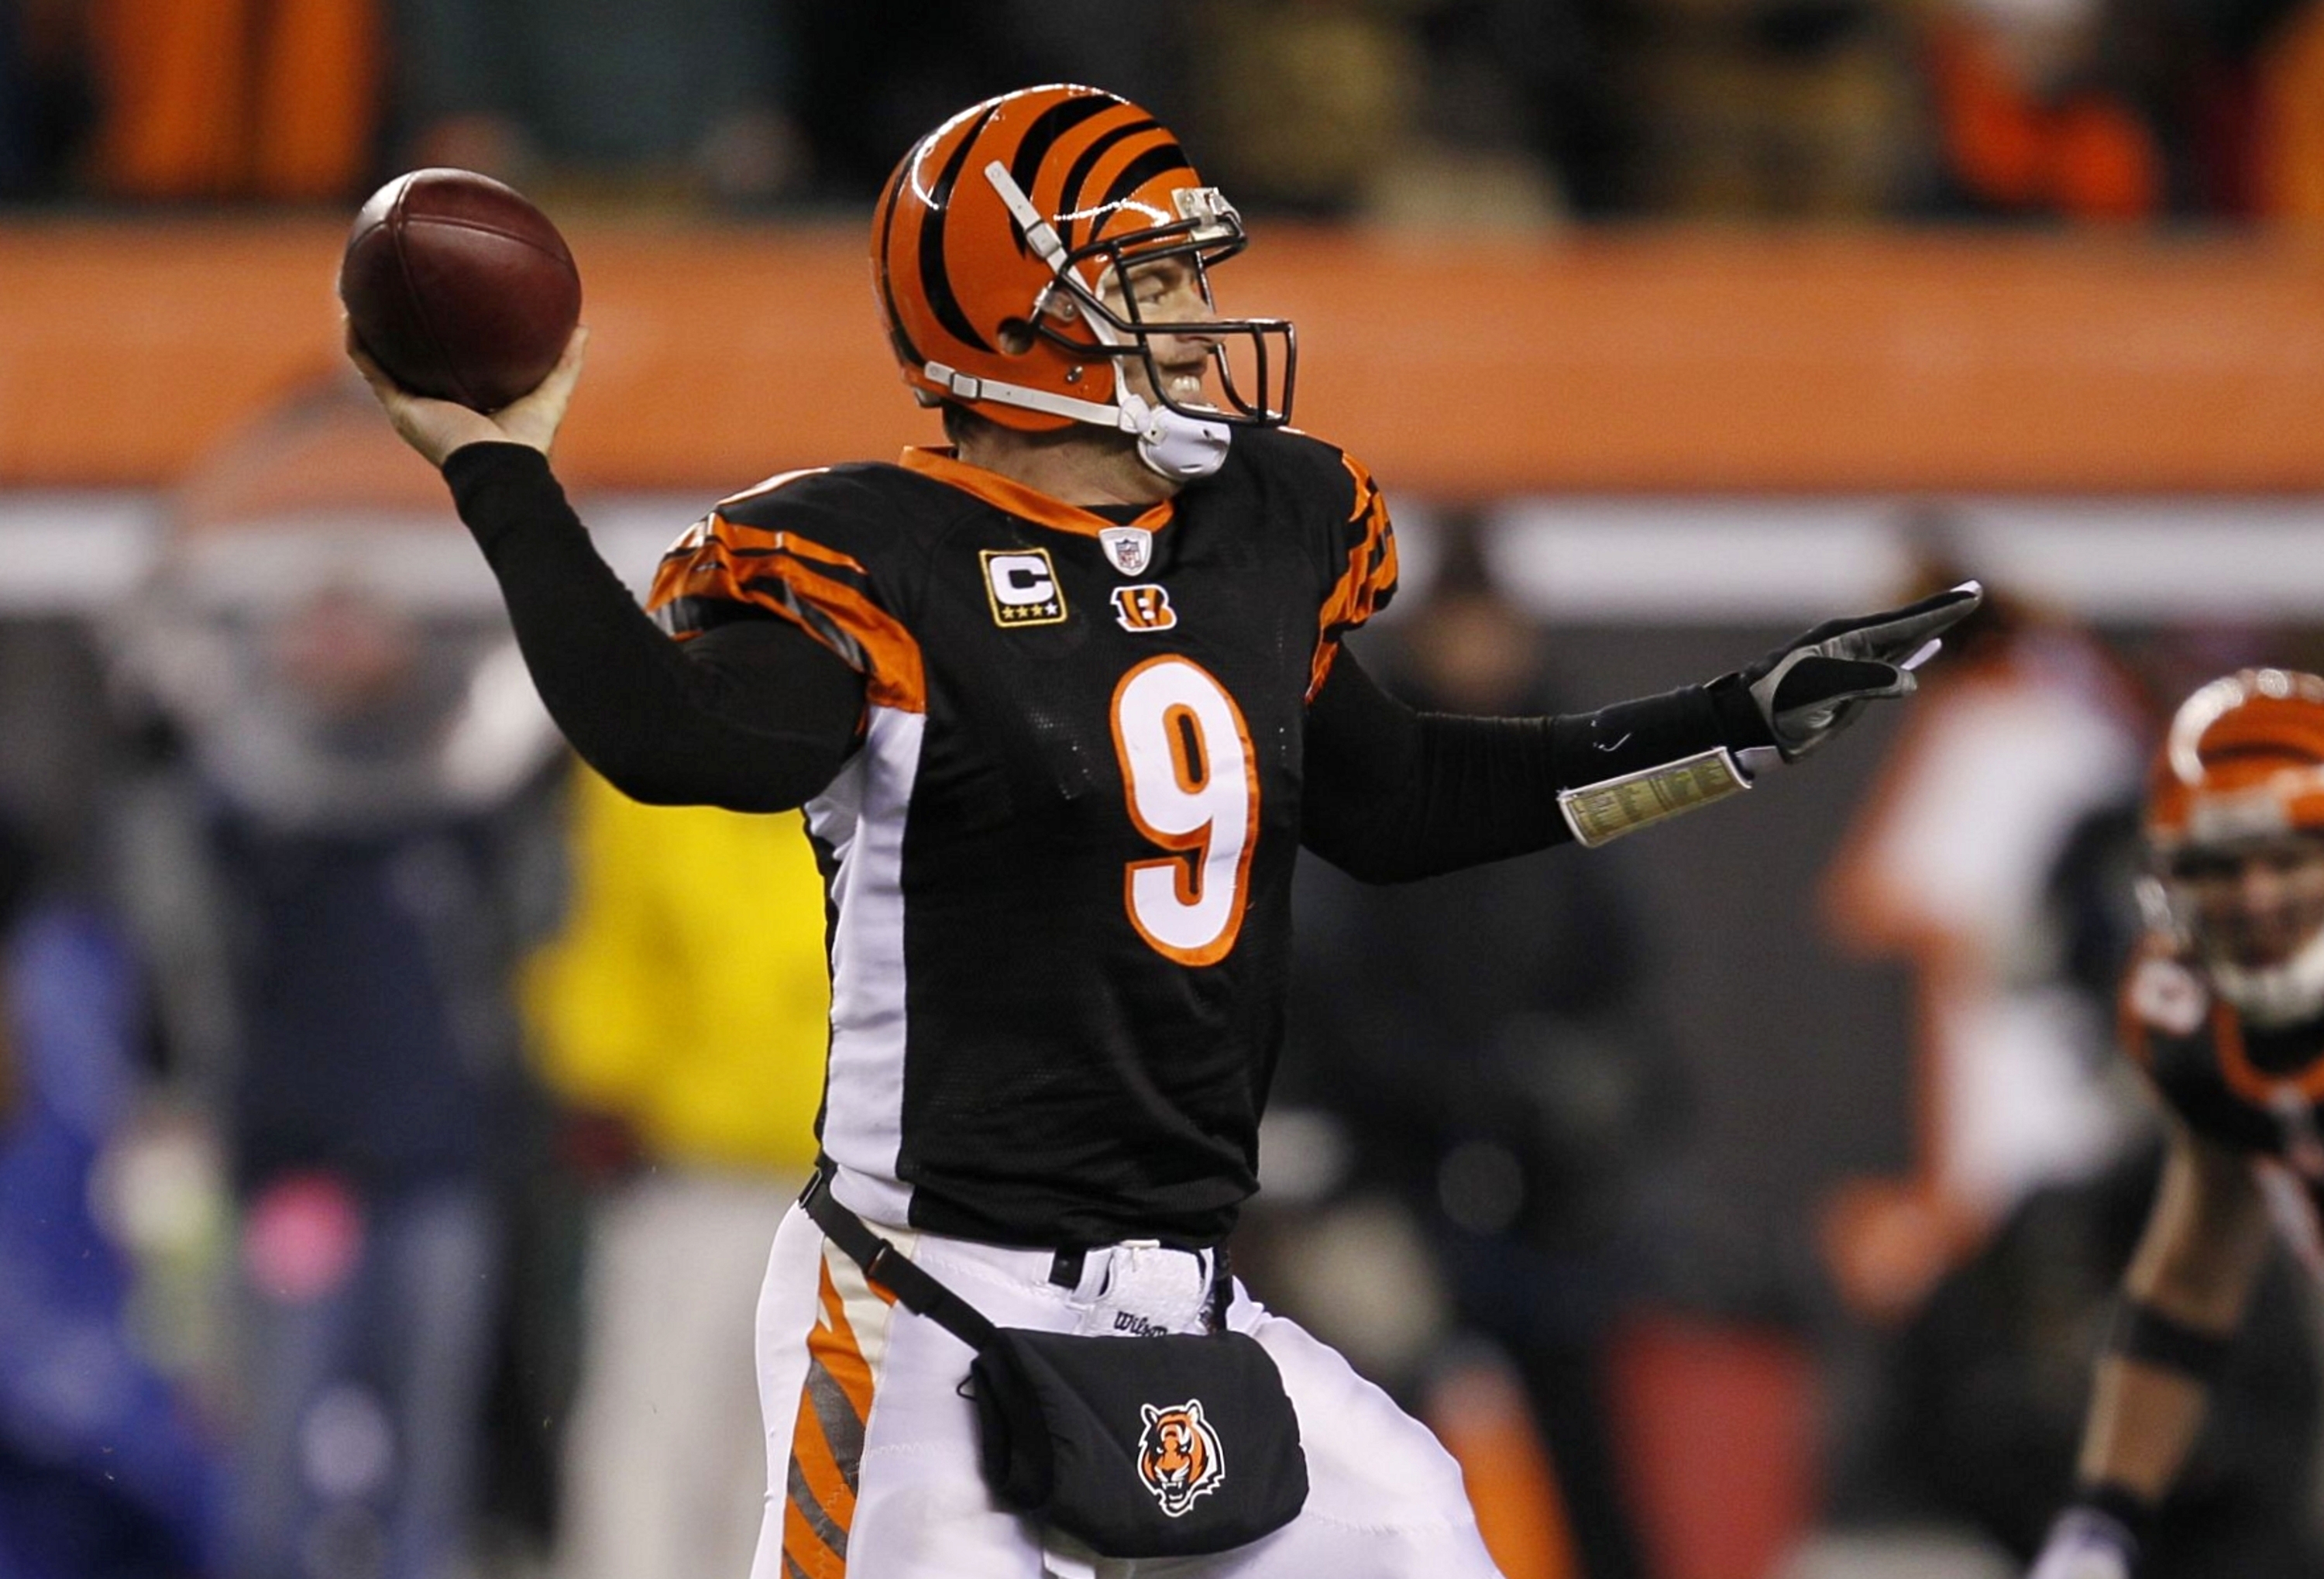 CINCINNATI - JANUARY 9:  Quarterback Carson Palmer #9 of the Cincinnati Bengals passes the ball in the fourth quarter against the New York Jets during the 2010 AFC wild-card playoff game at Paul Brown Stadium on January 9, 2010 in Cincinnati, Ohio. (Photo